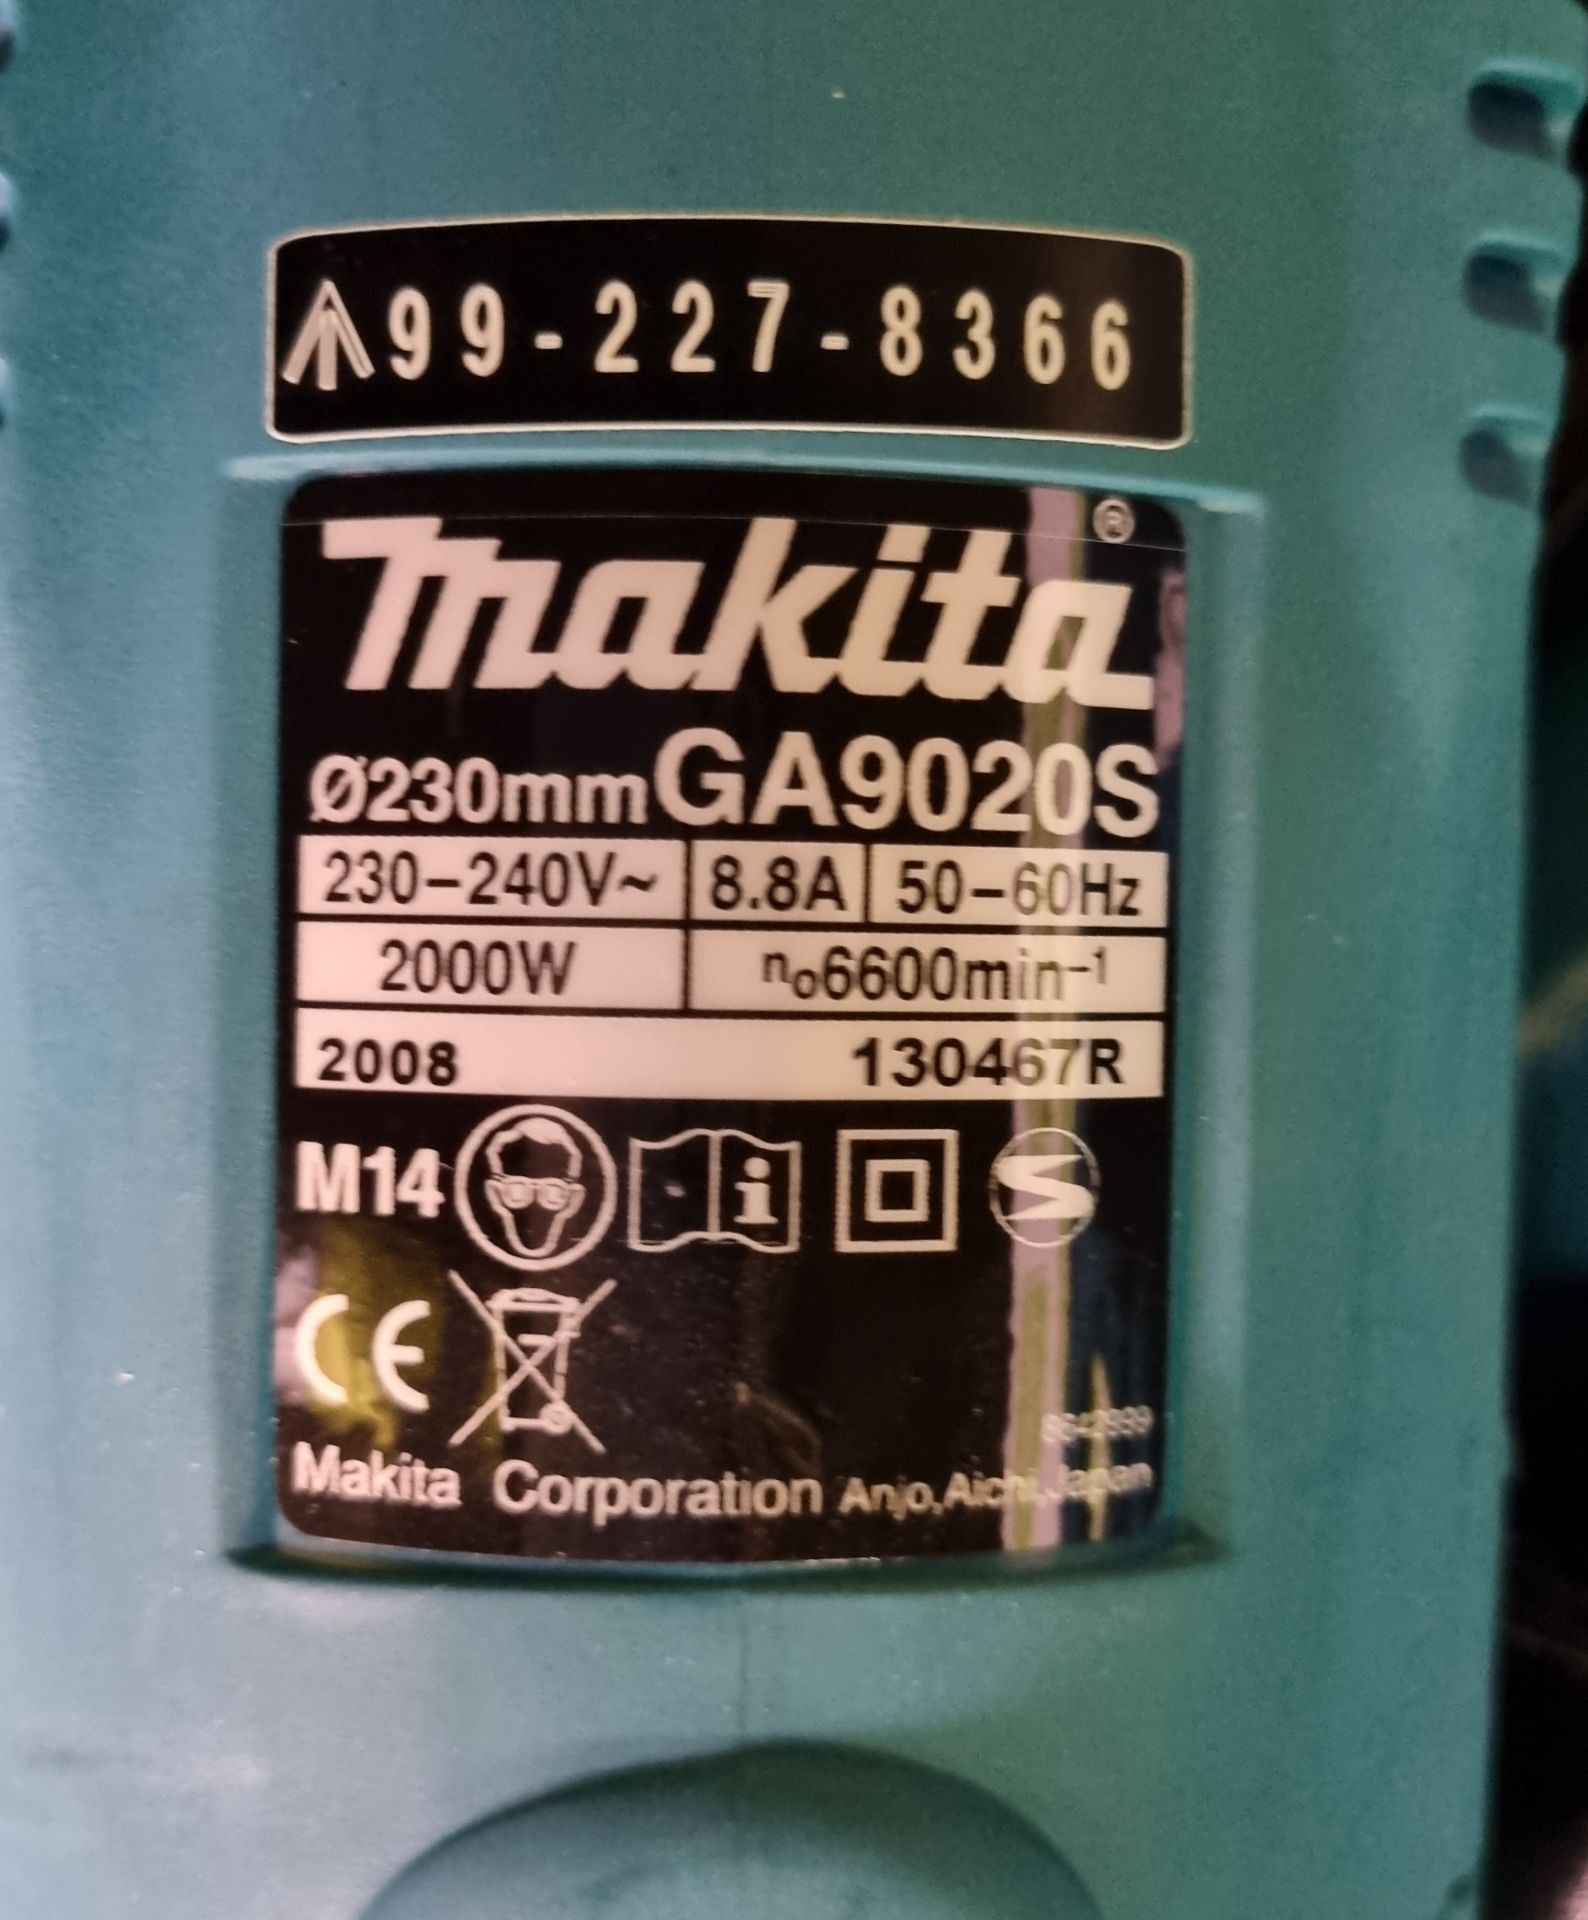 Makita GA9020S 9 inch electric angle grinder with case - 2000W - no discs - Image 5 of 8